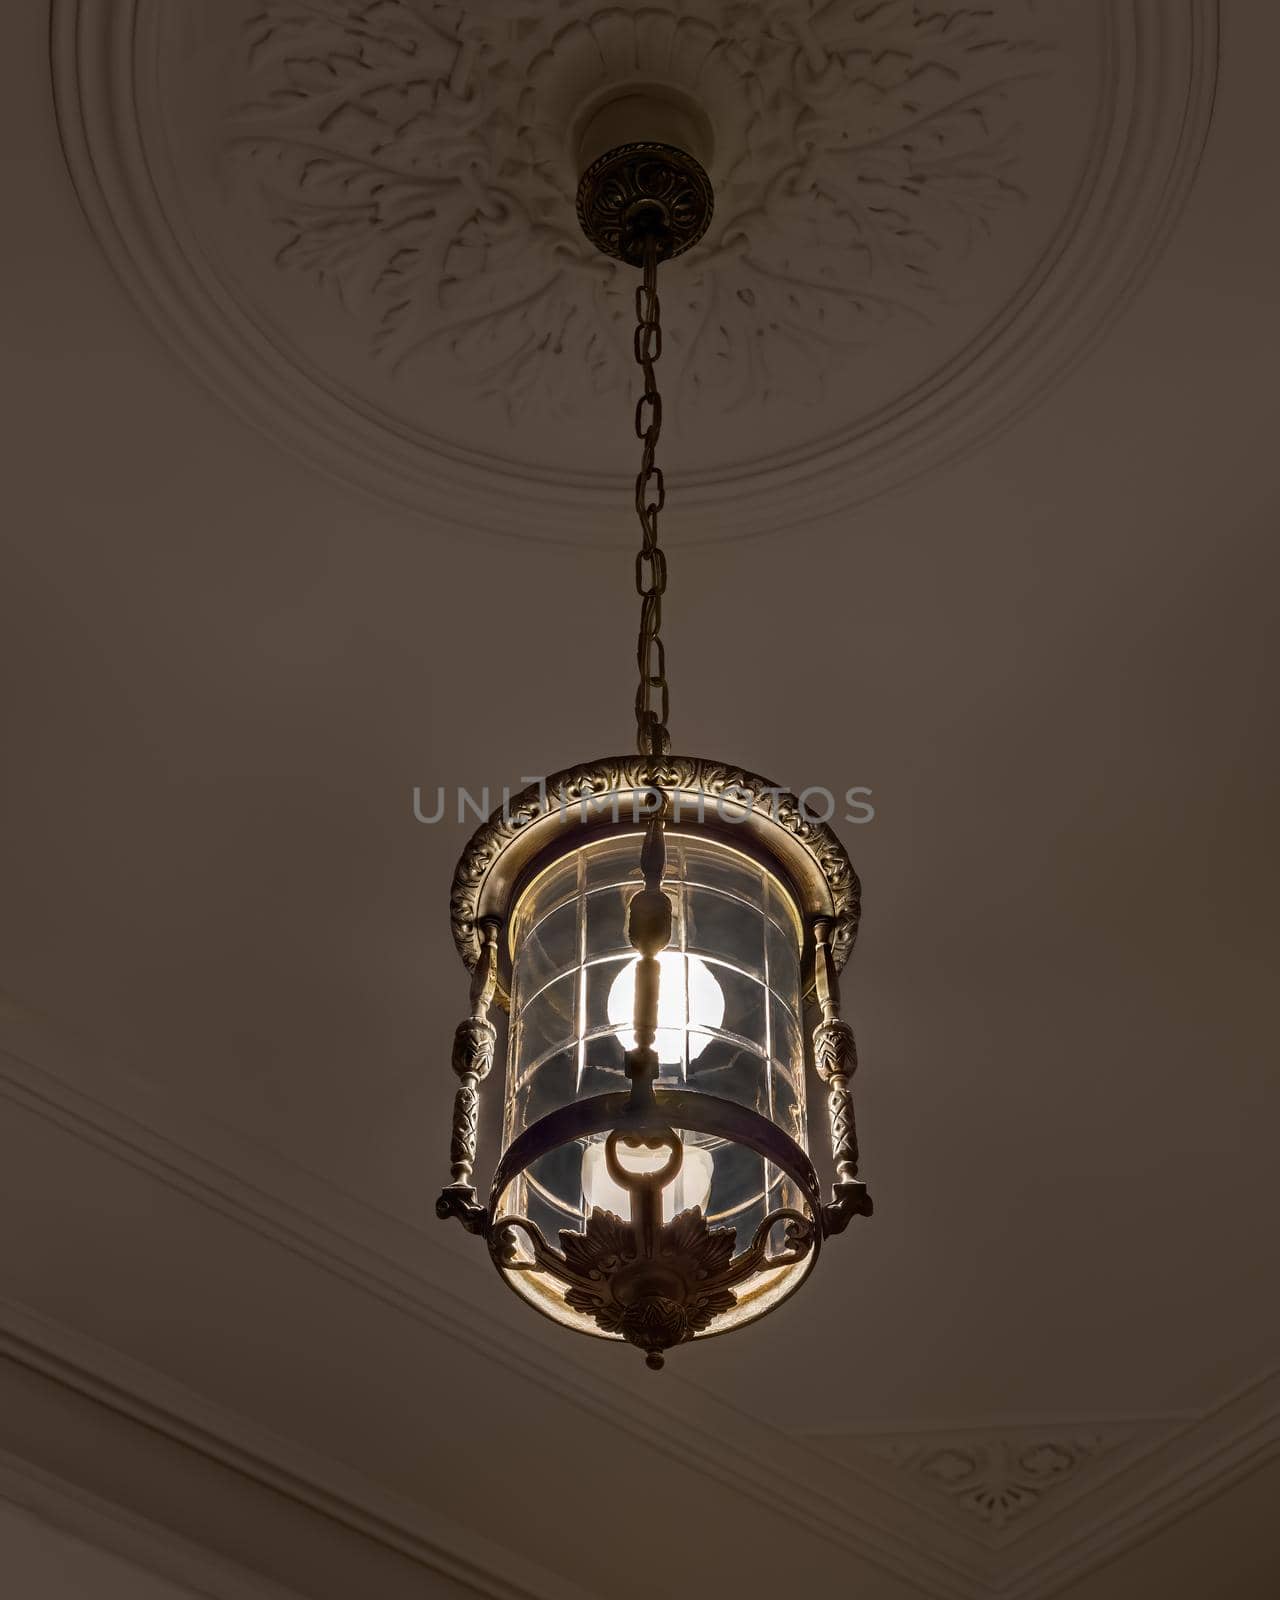 Vintage chandelier in the interior of dark room with with light on by apavlin